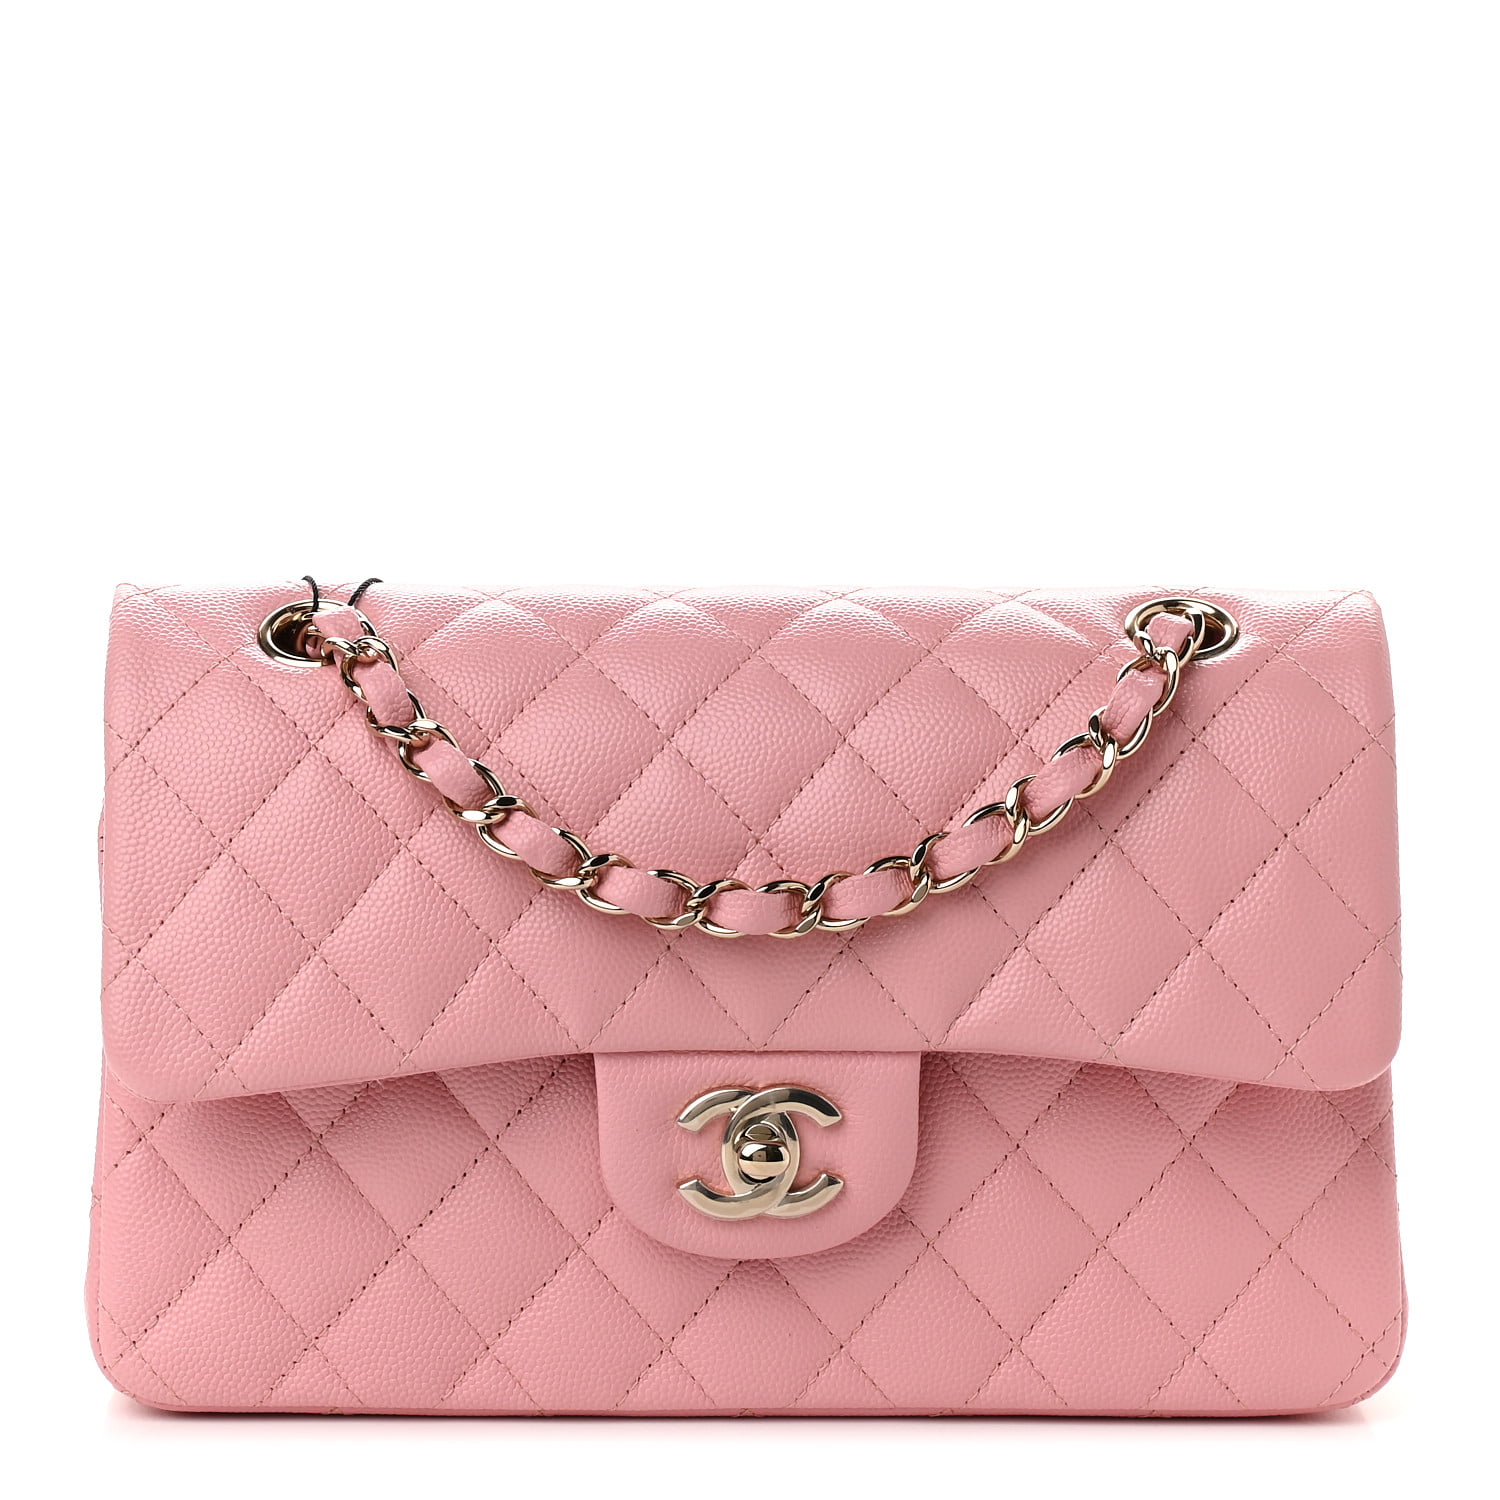 The Chanel Pink Quiz - Can You Identify Them? ? - PurseBop